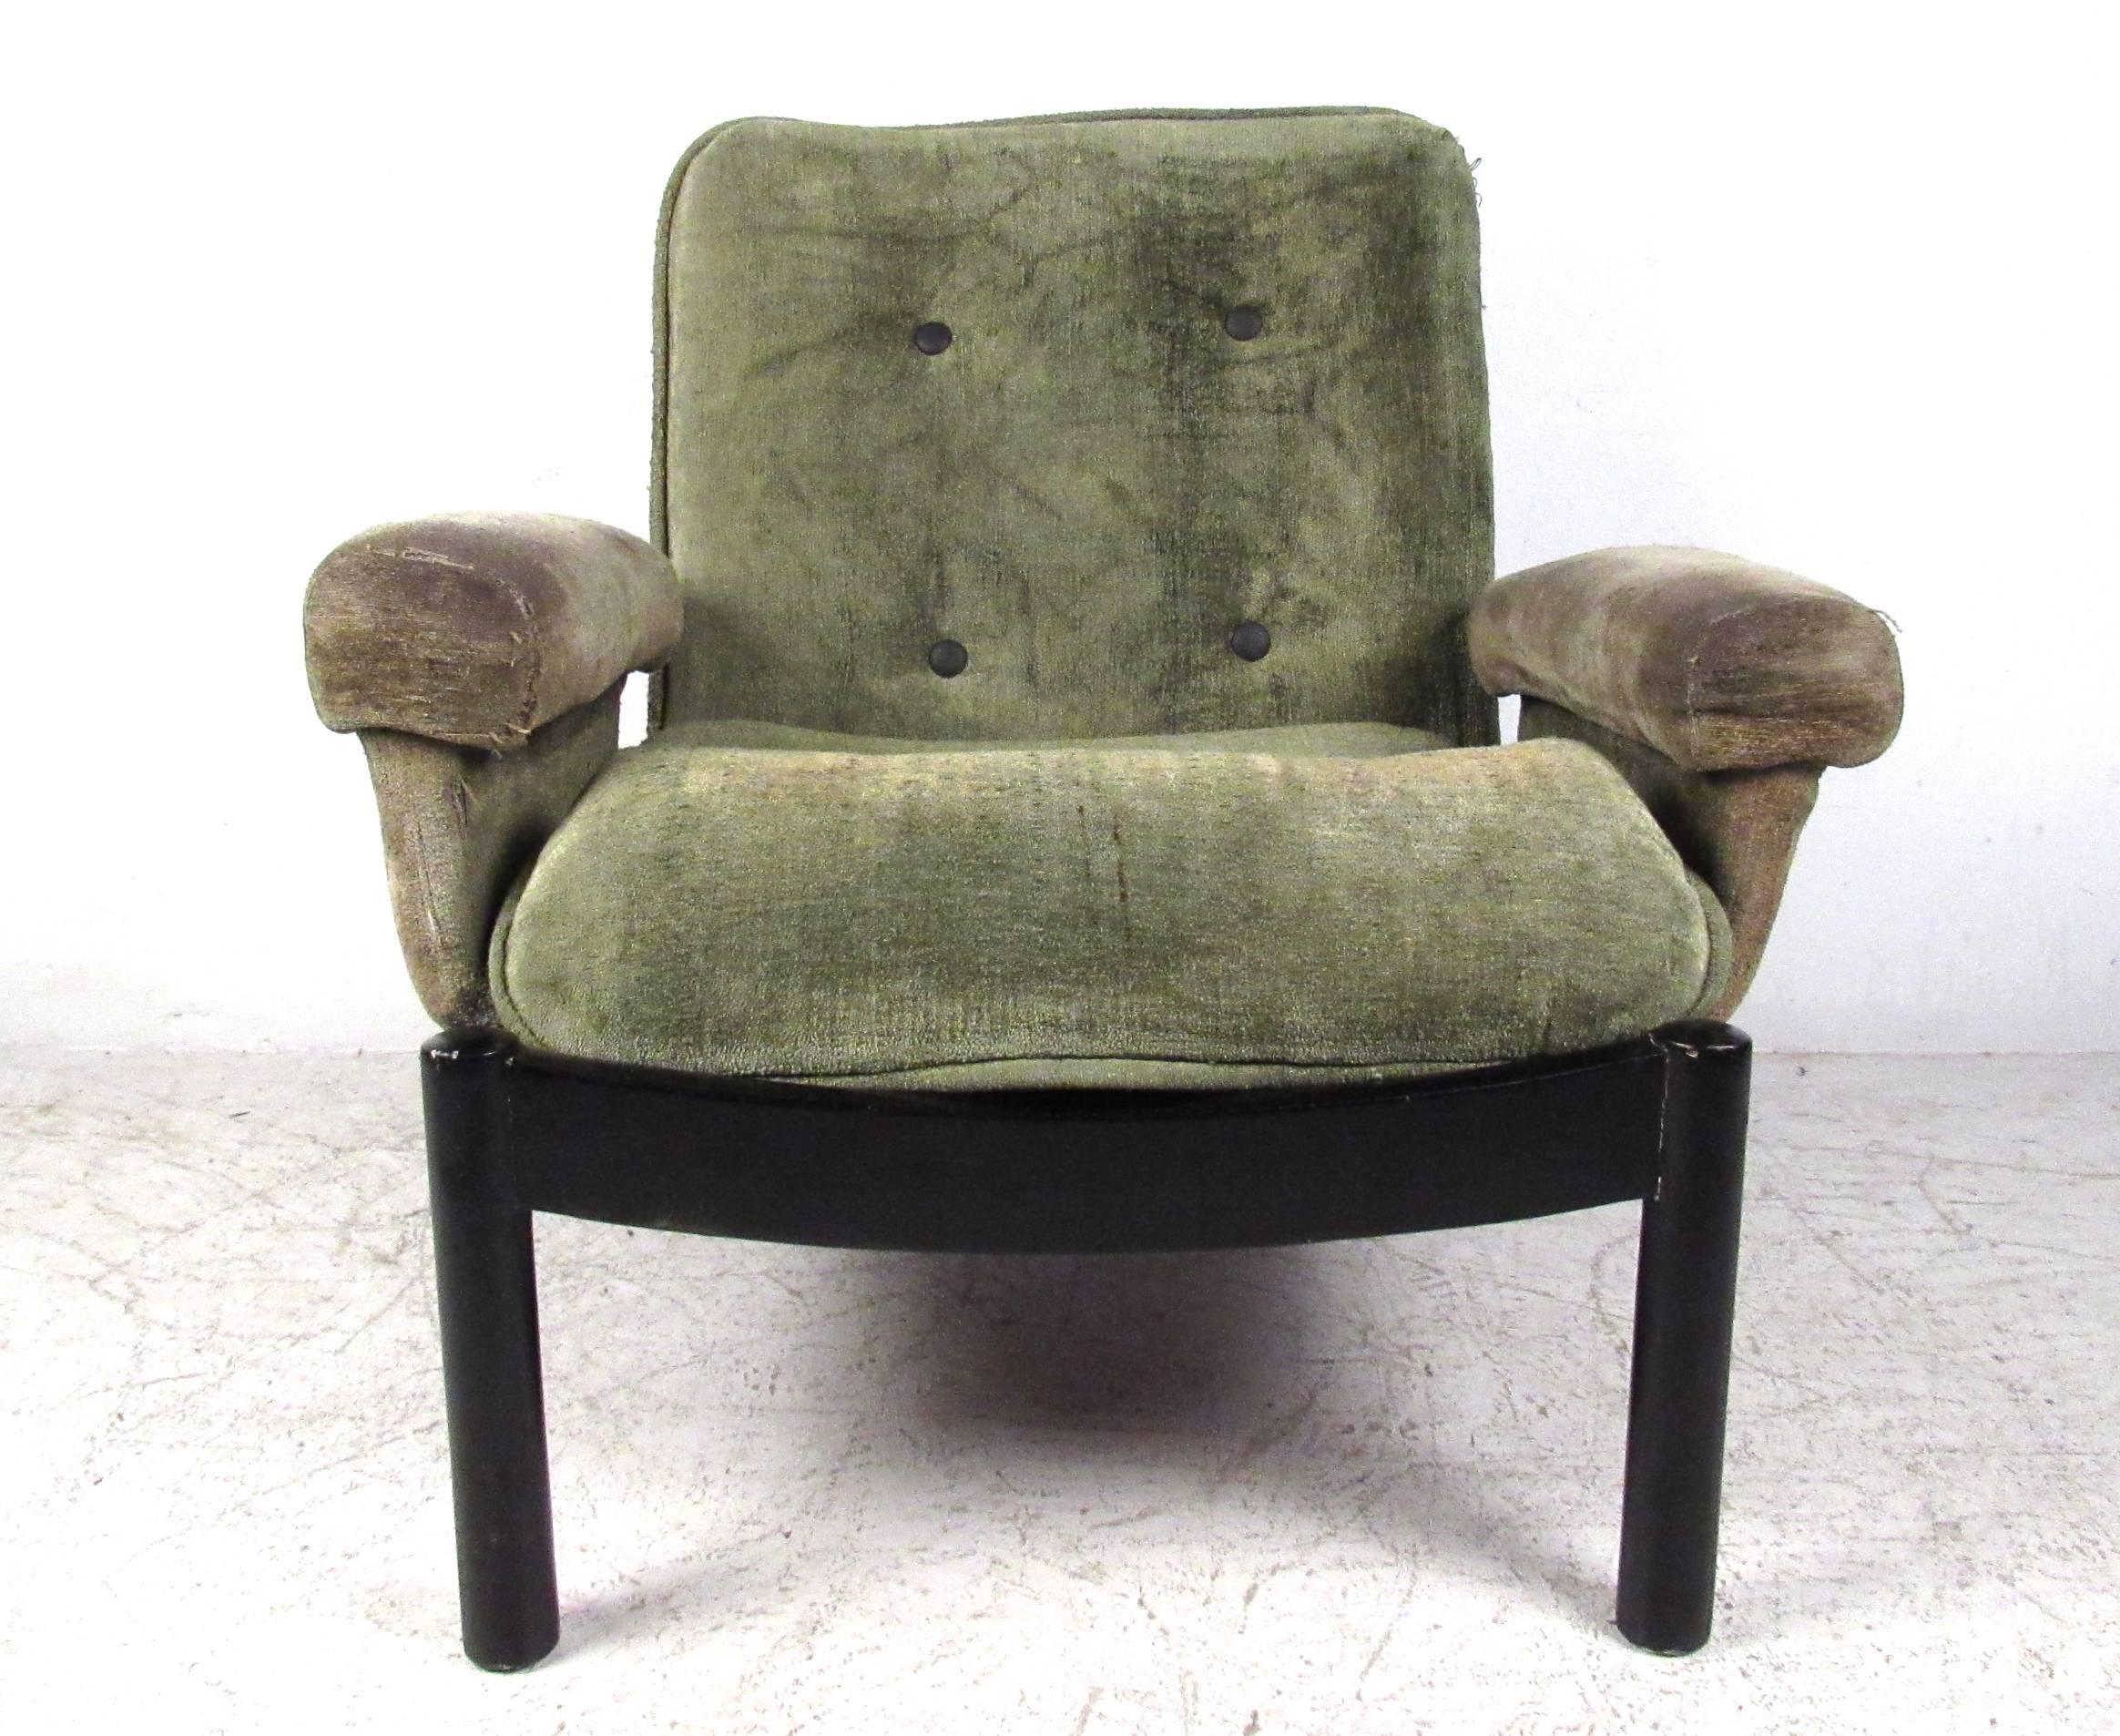 This uniquely designed vintage chair features a low slung style, complete with upholstered armrests, black lacquered frame,  and tufted seat back. Wide seat and plush seat back make this a comfortable addition to seating in any situation. Please